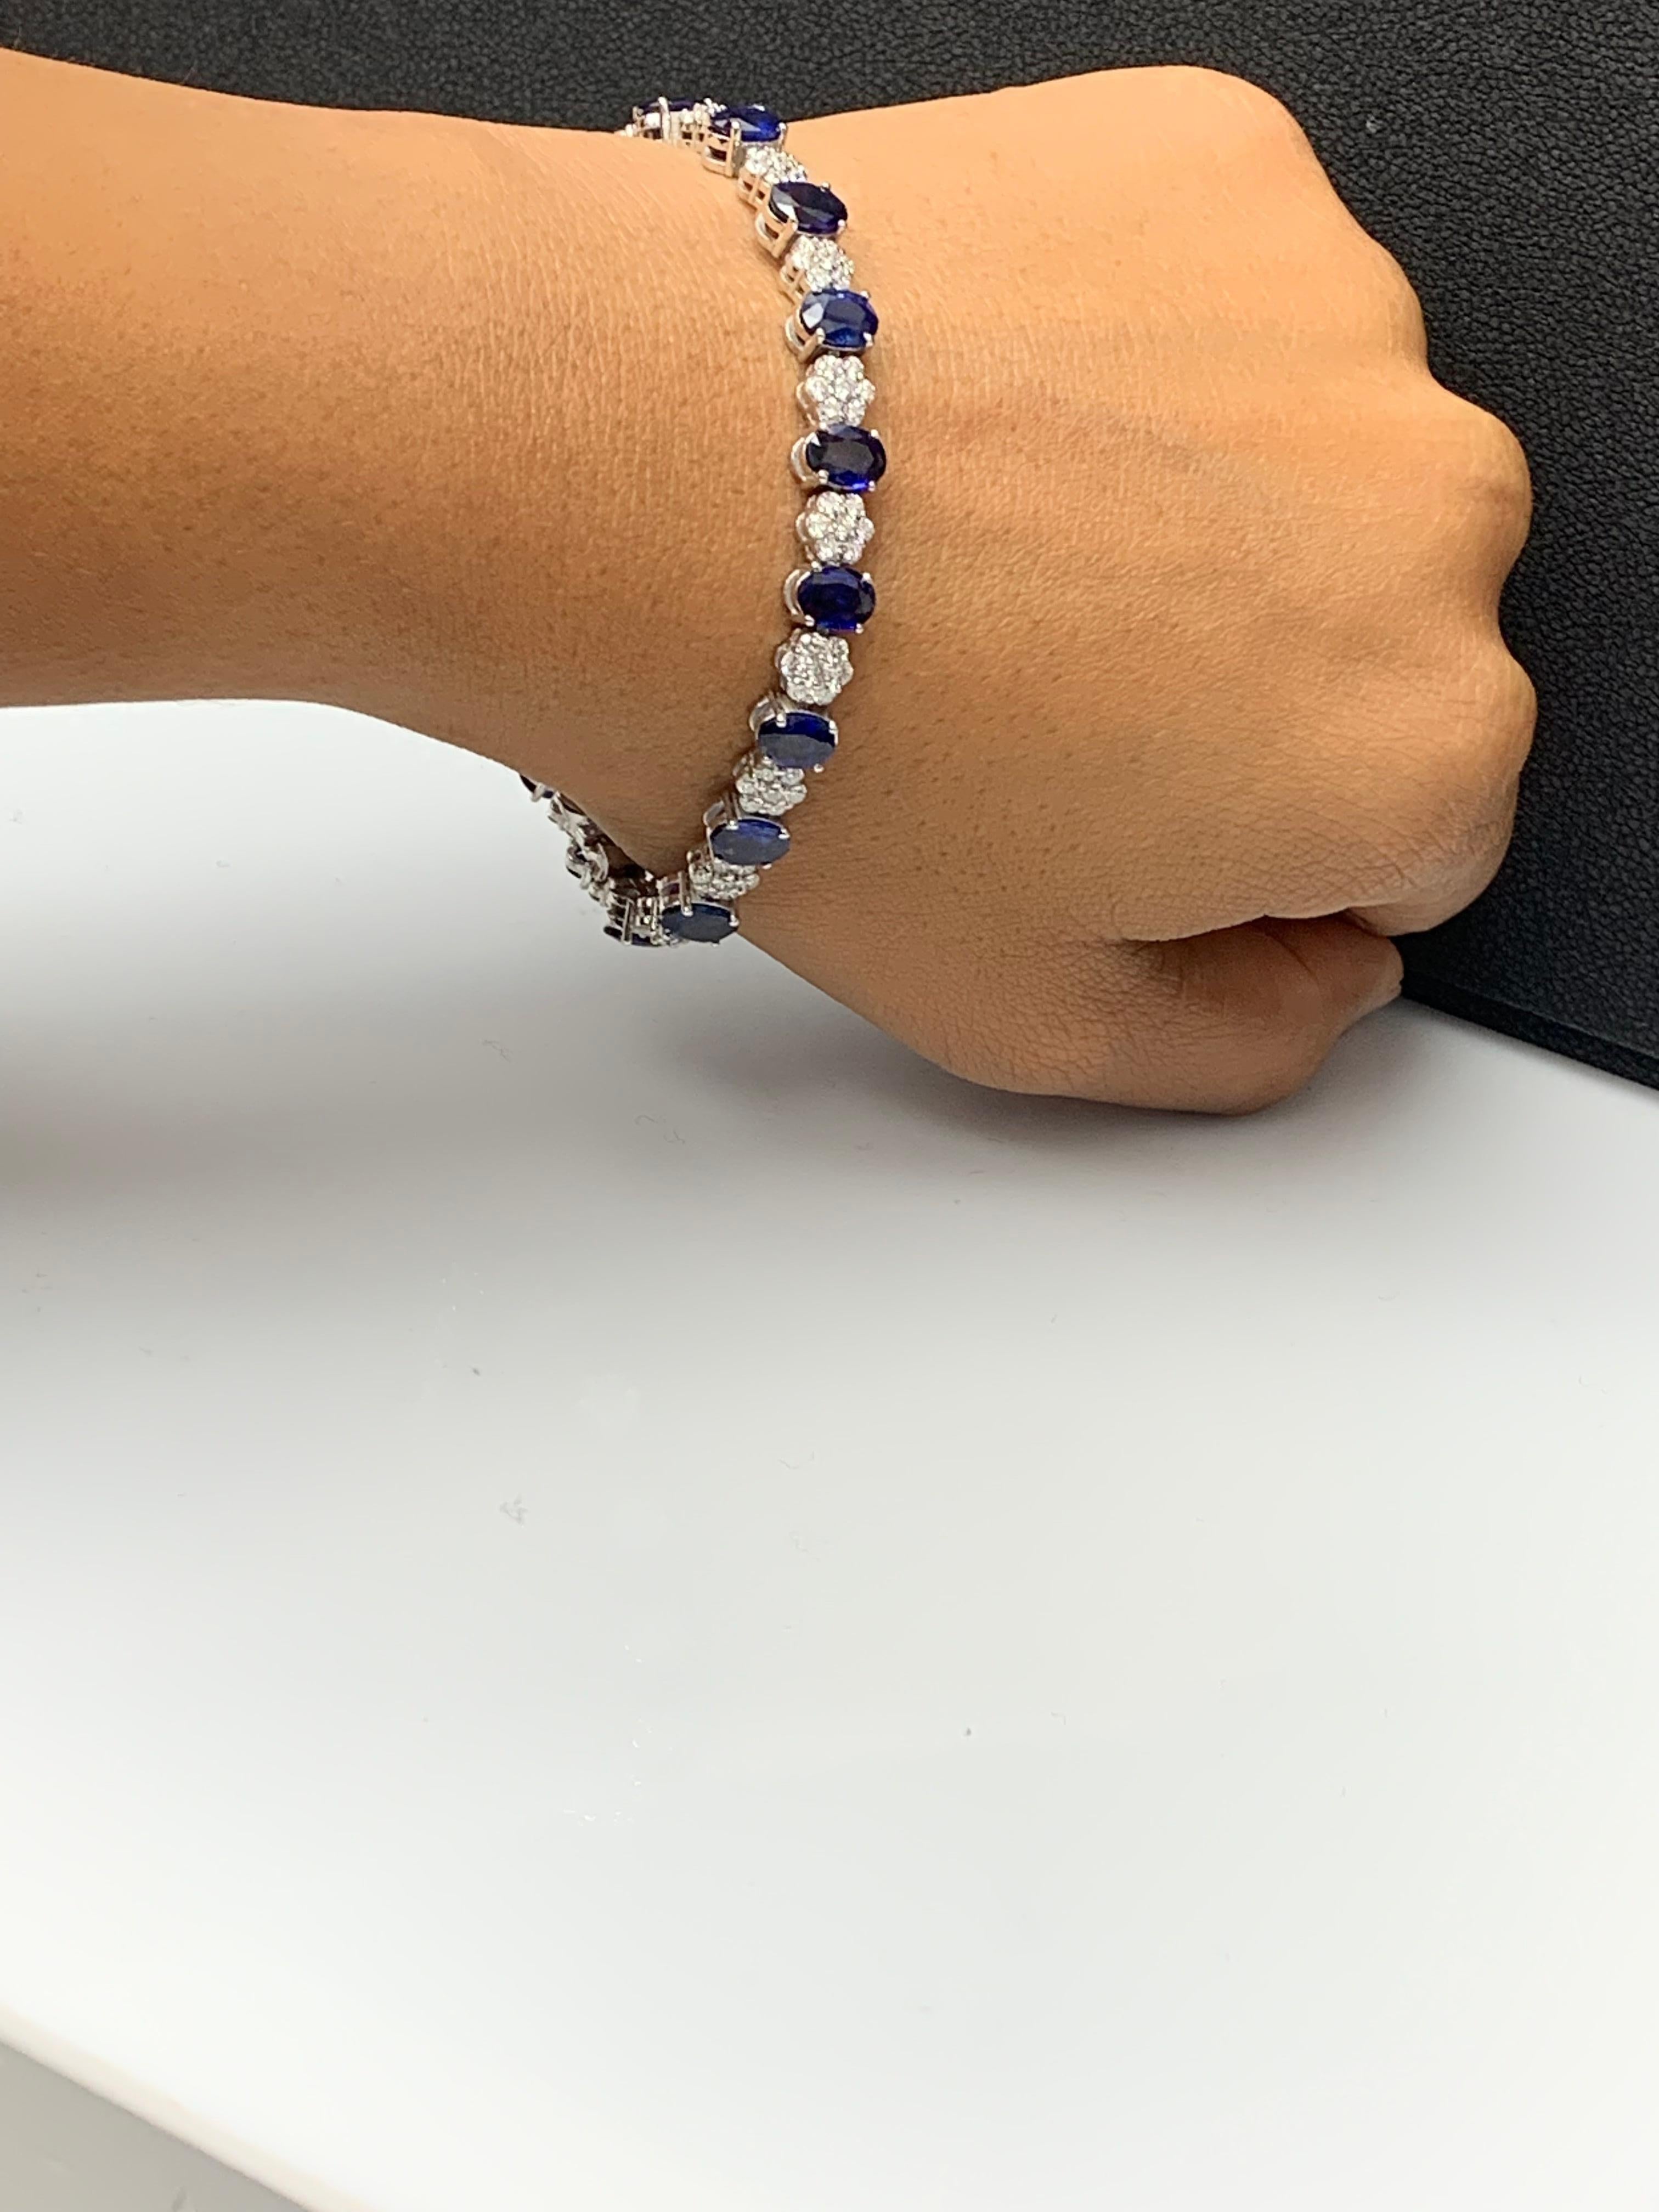 Modern 15.26 Carat Oval Cut Blue Sapphire and Diamond Tennis Bracelet in 14K White Gold For Sale